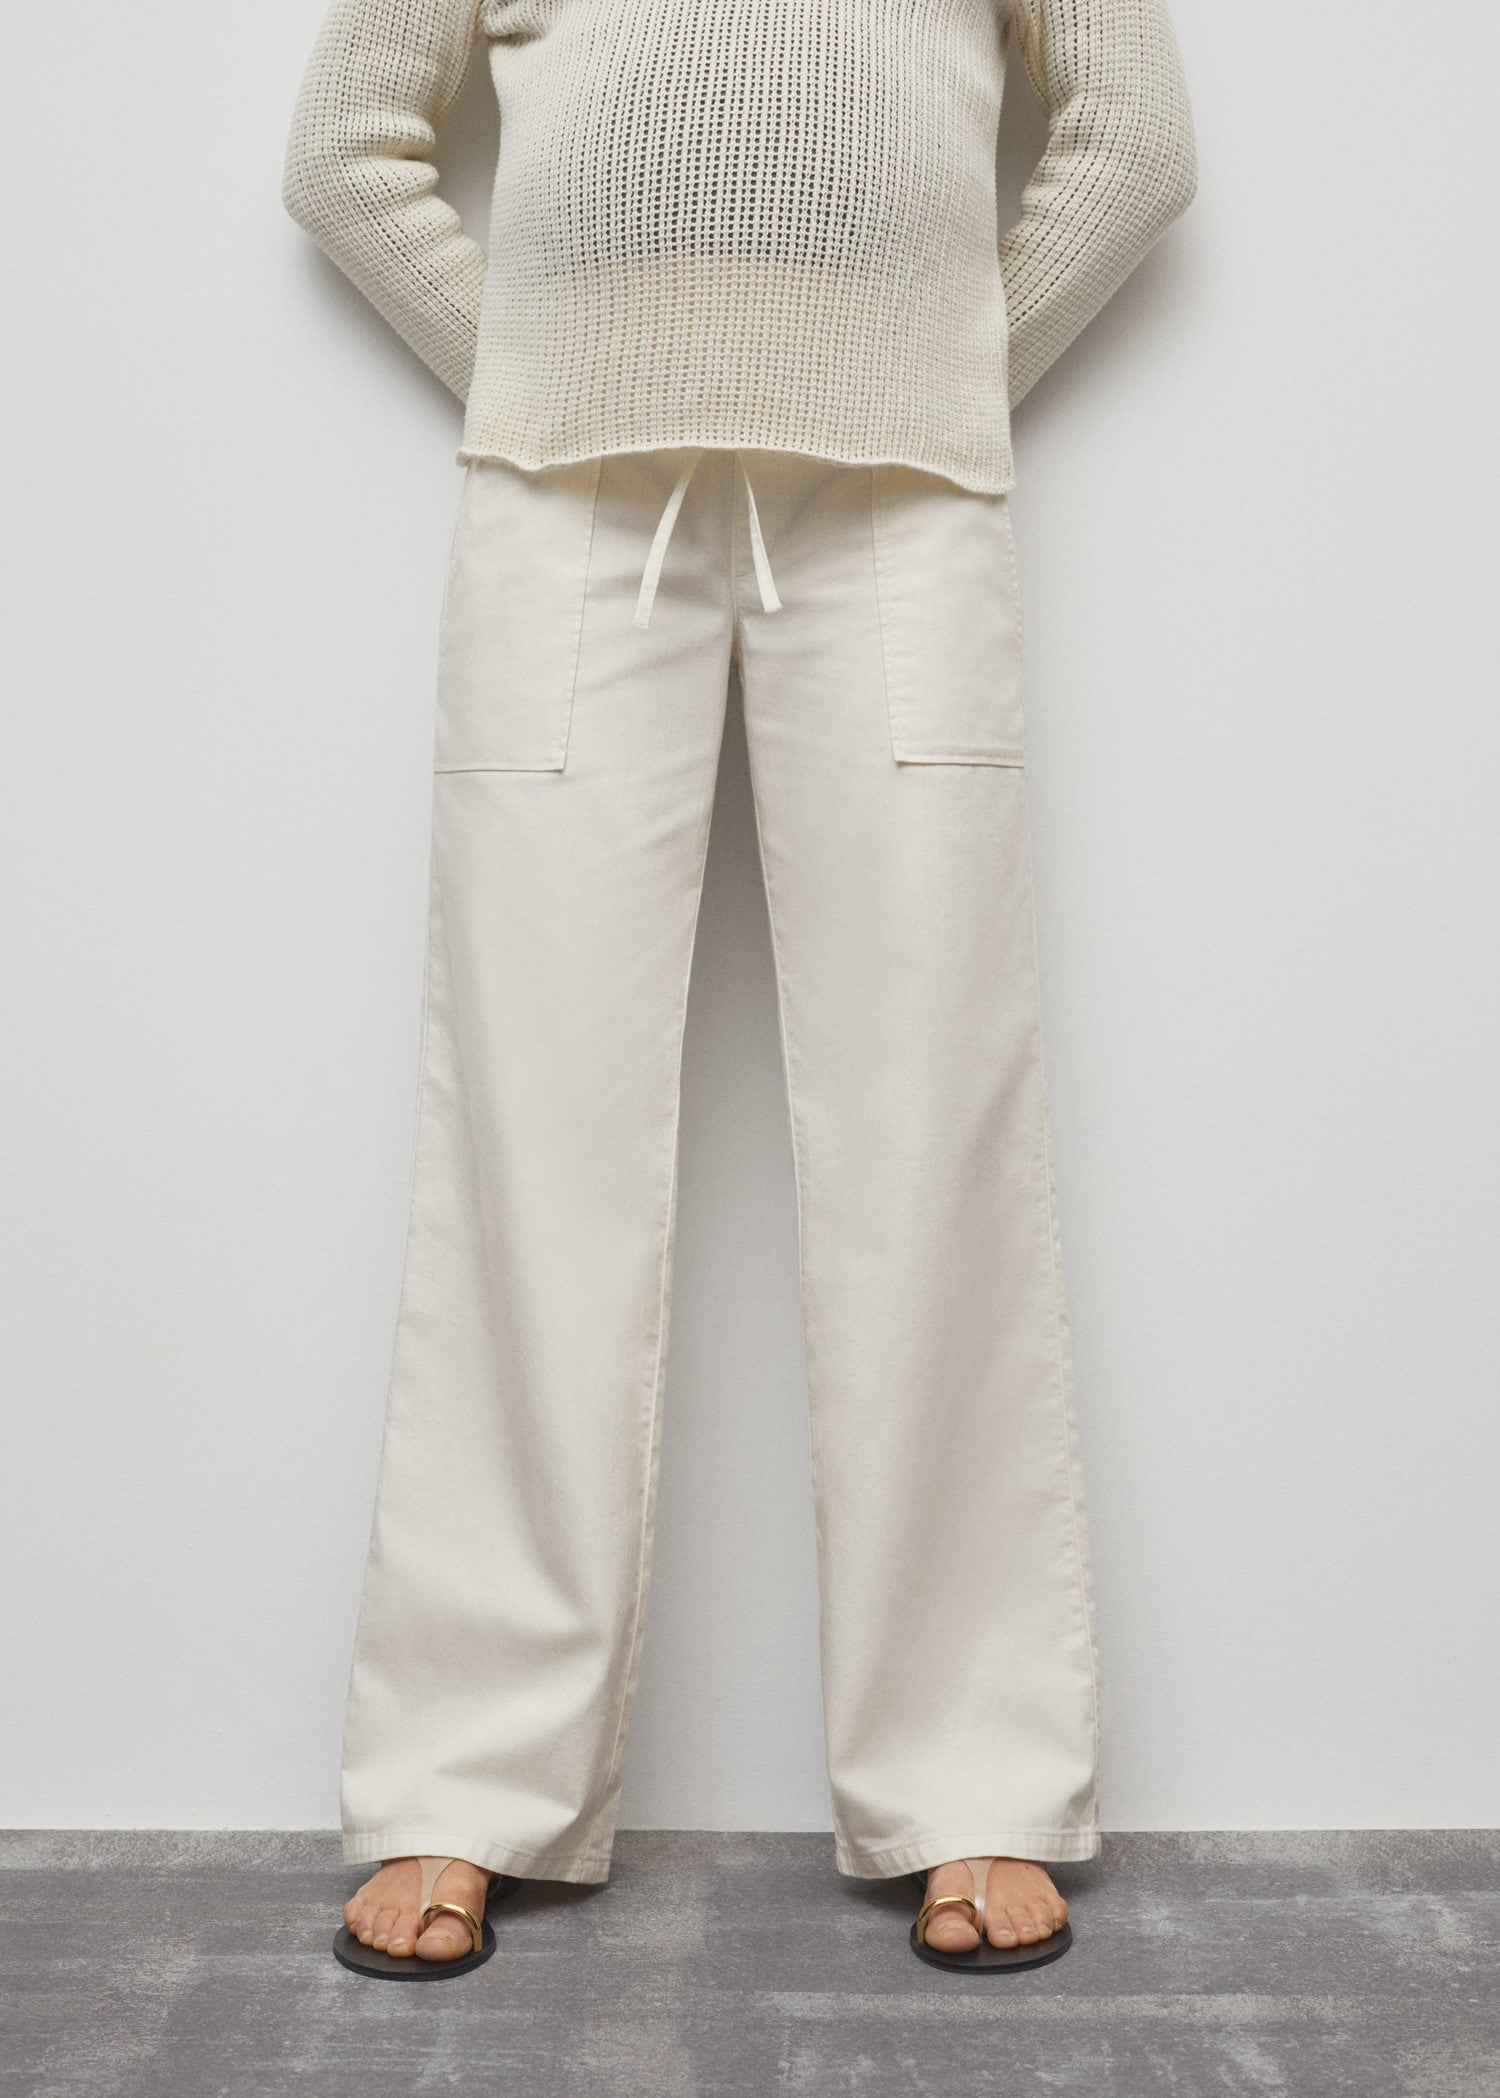 Cotton pants with adjustable drawstring